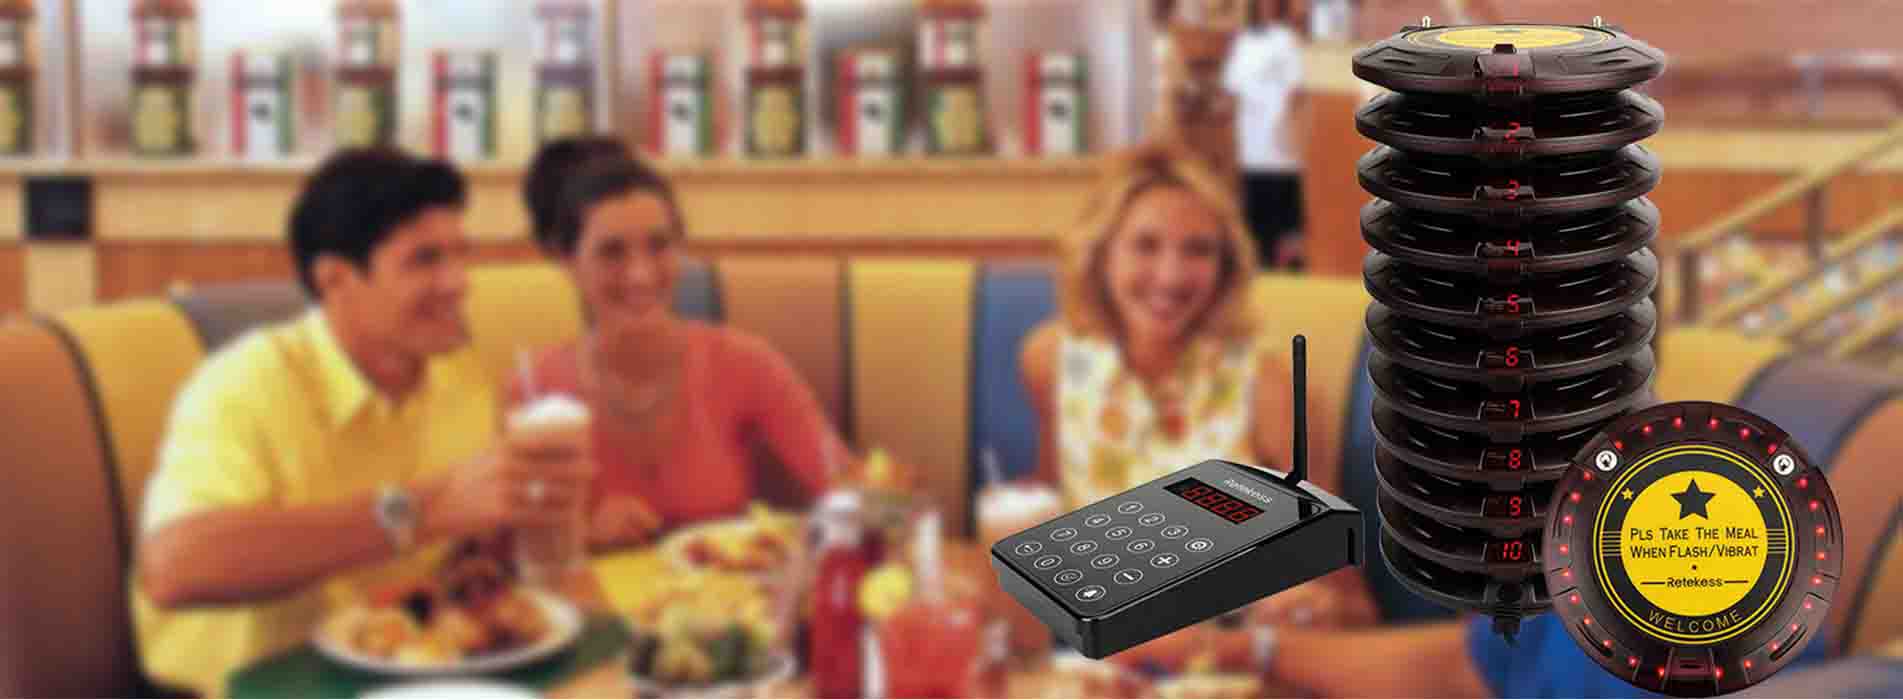 Why do you need the Retekess Paging System for the restaurant?